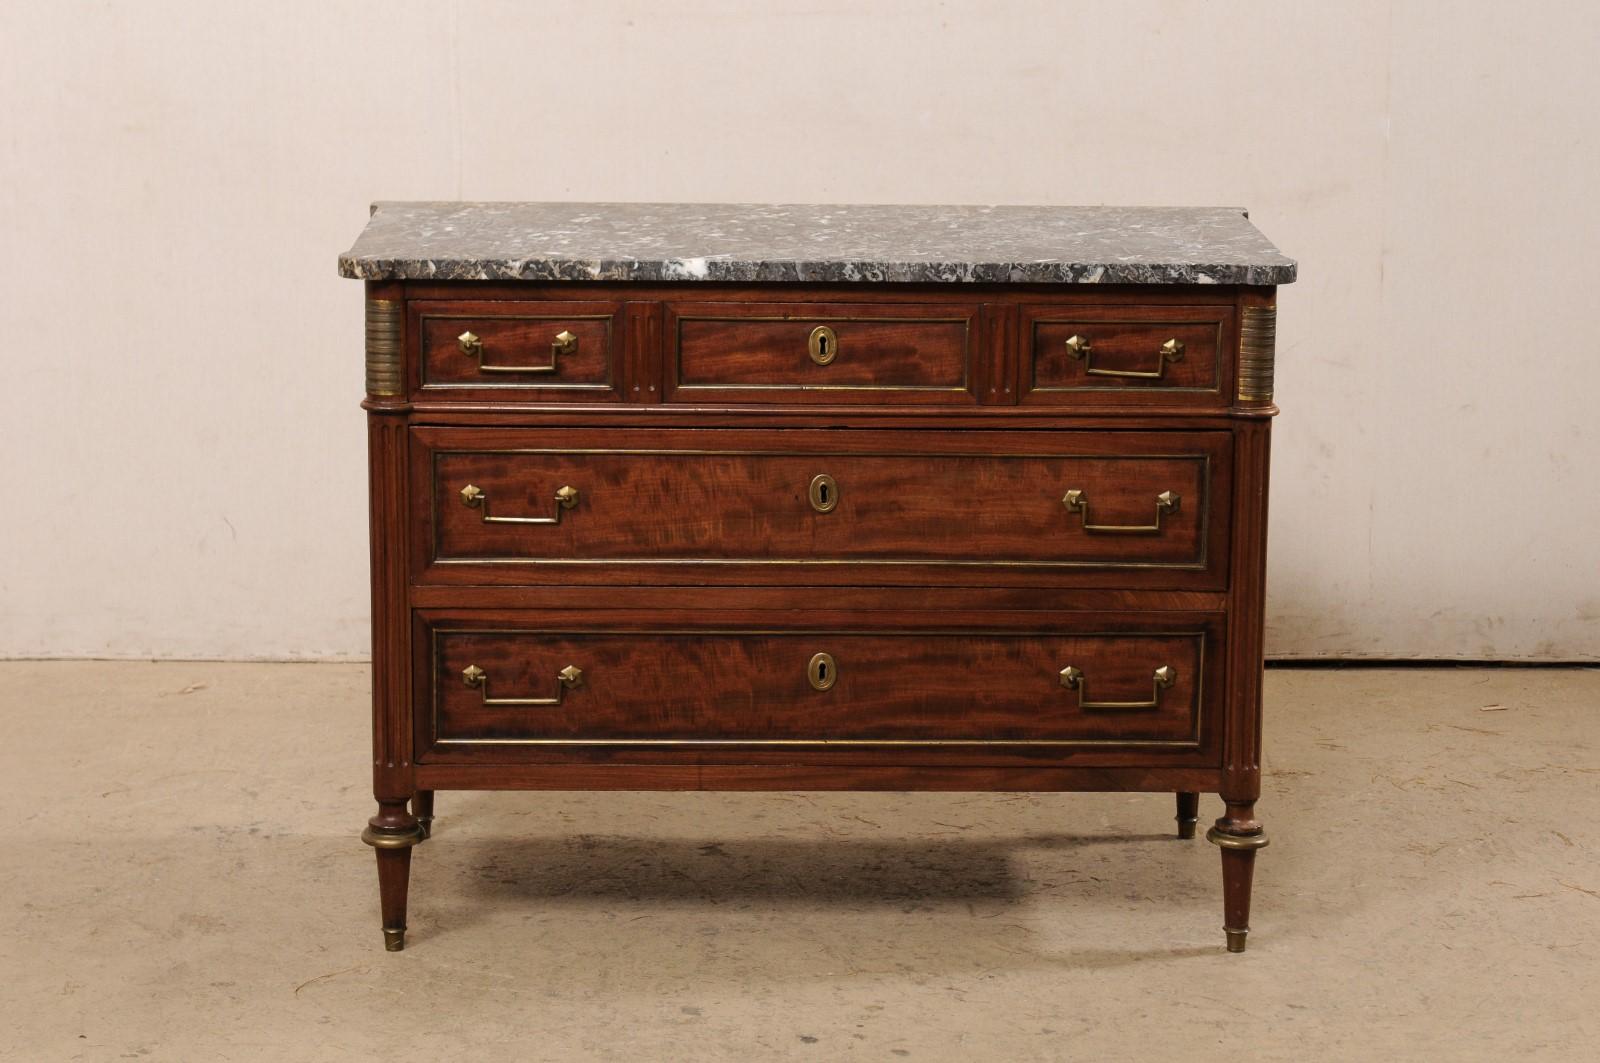 Neoclassical French Period Neoclassic Gray Marble-Top Commode w/Brass Accents For Sale